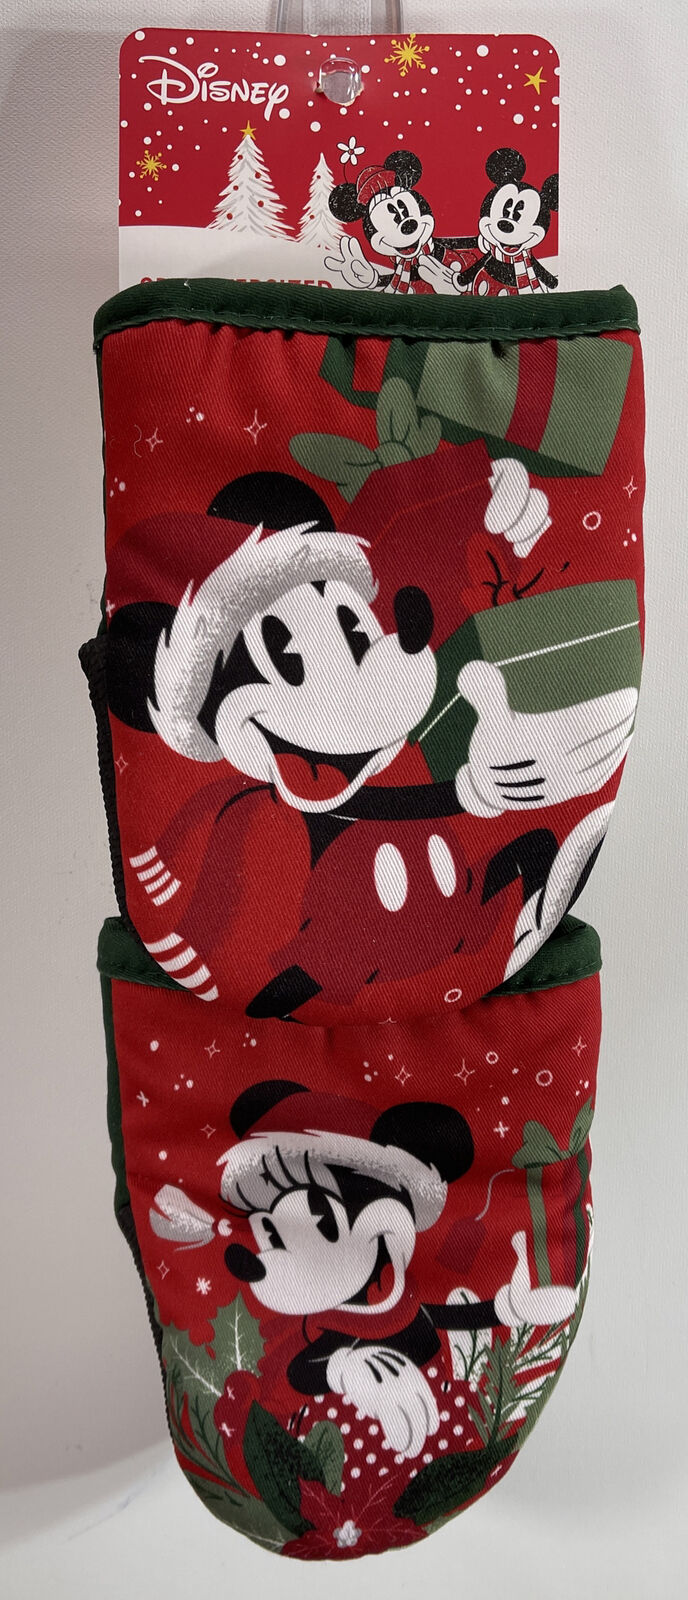 Disney 2 Pack Oversized Christmas Mini Oven Mitts with Mickey & Minnie New